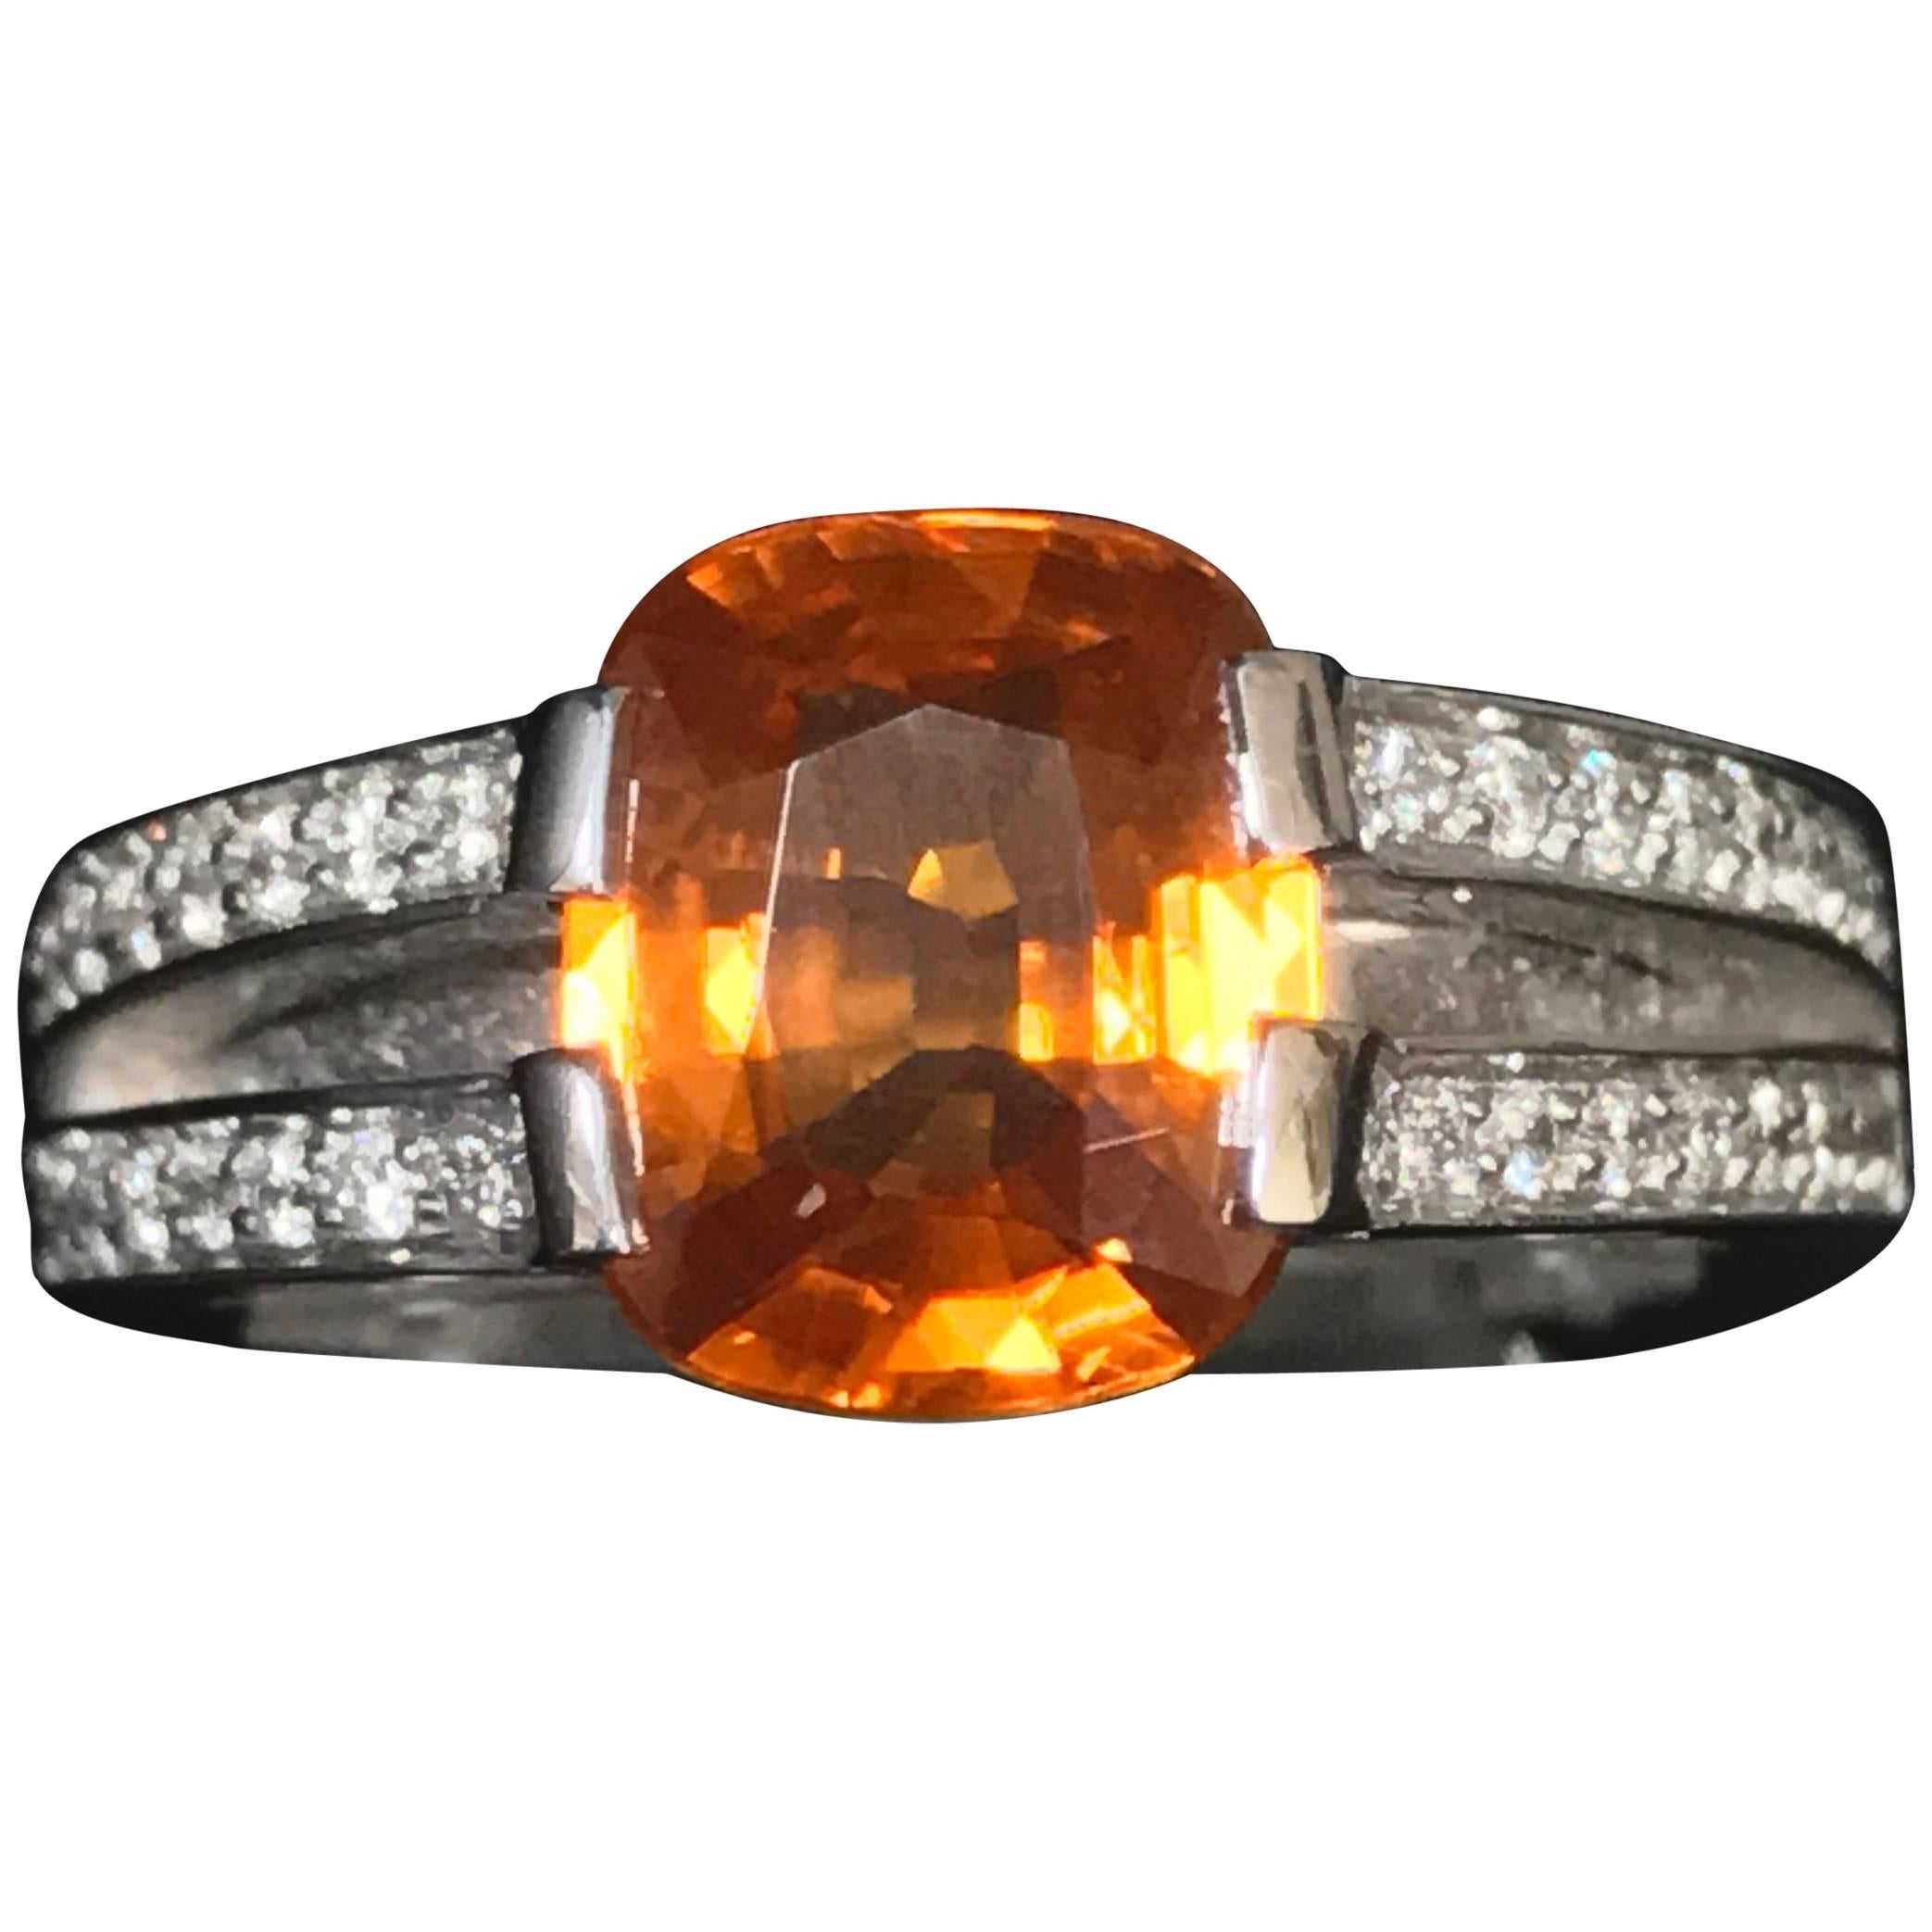 Discover this Orange Sapphire Diamonds and White Gold Ring.
White Gold 18 Carat
Diamonds 0.32 Carat
Yellow/Orange Sapphire 3.02 Carat
Very Comfortable
Made In Our Workshops
Size : 53